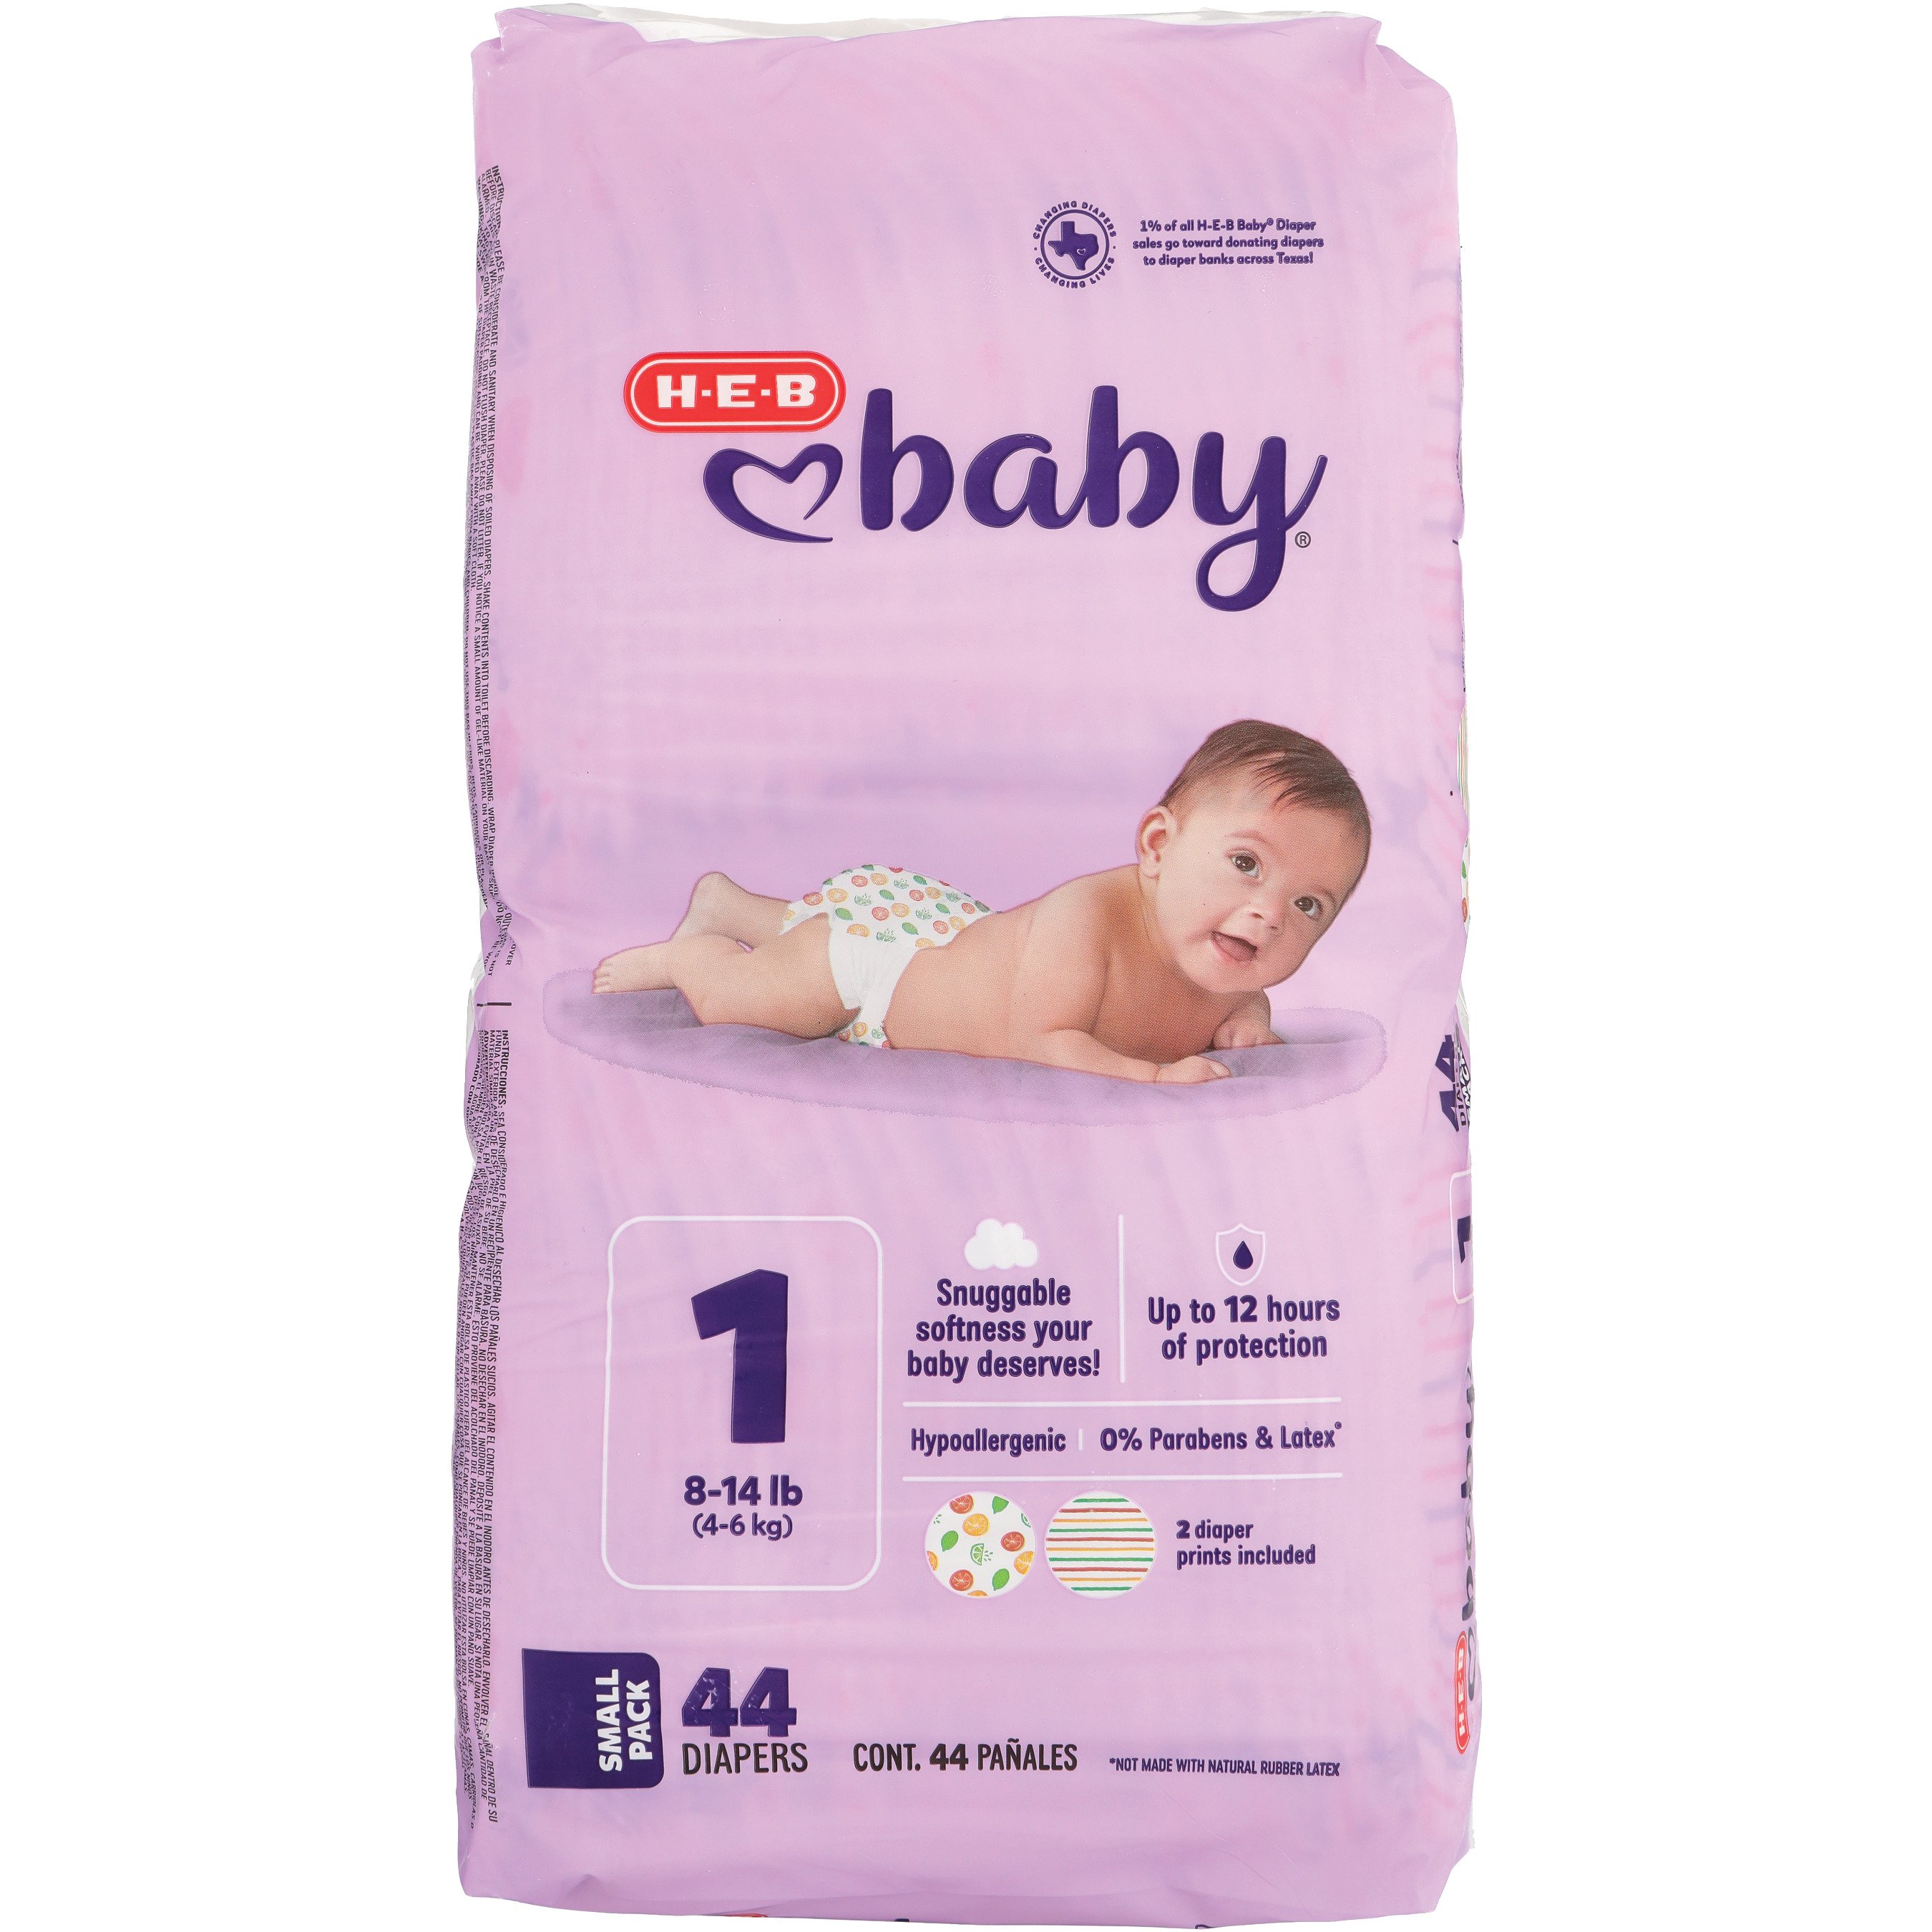 Sterkte struik parfum H-E-B Baby Jumbo Diapers - Size 1 - Shop Diapers & Potty at H-E-B